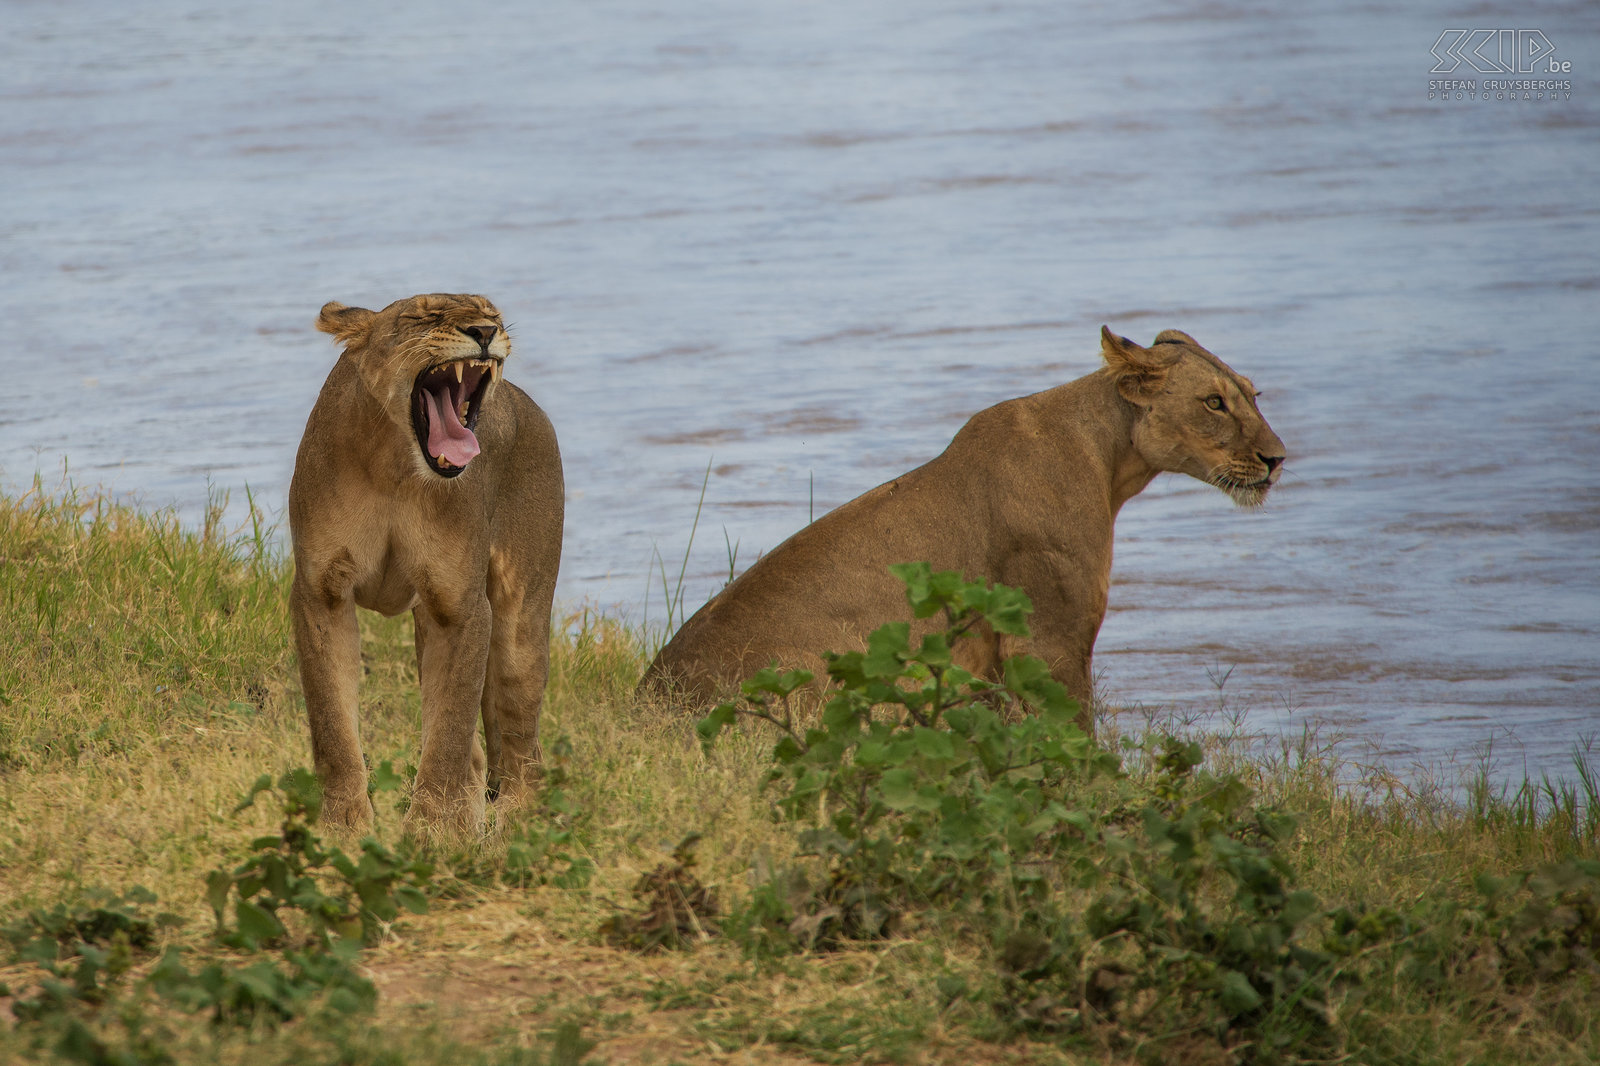 Samburu - Lions We spotted two female lions on the river banks of the Ewaso Ng'iro river. They were lazy and lying on the ground. Finally they walked to the water, stretching themselfs and yawning. Stefan Cruysberghs